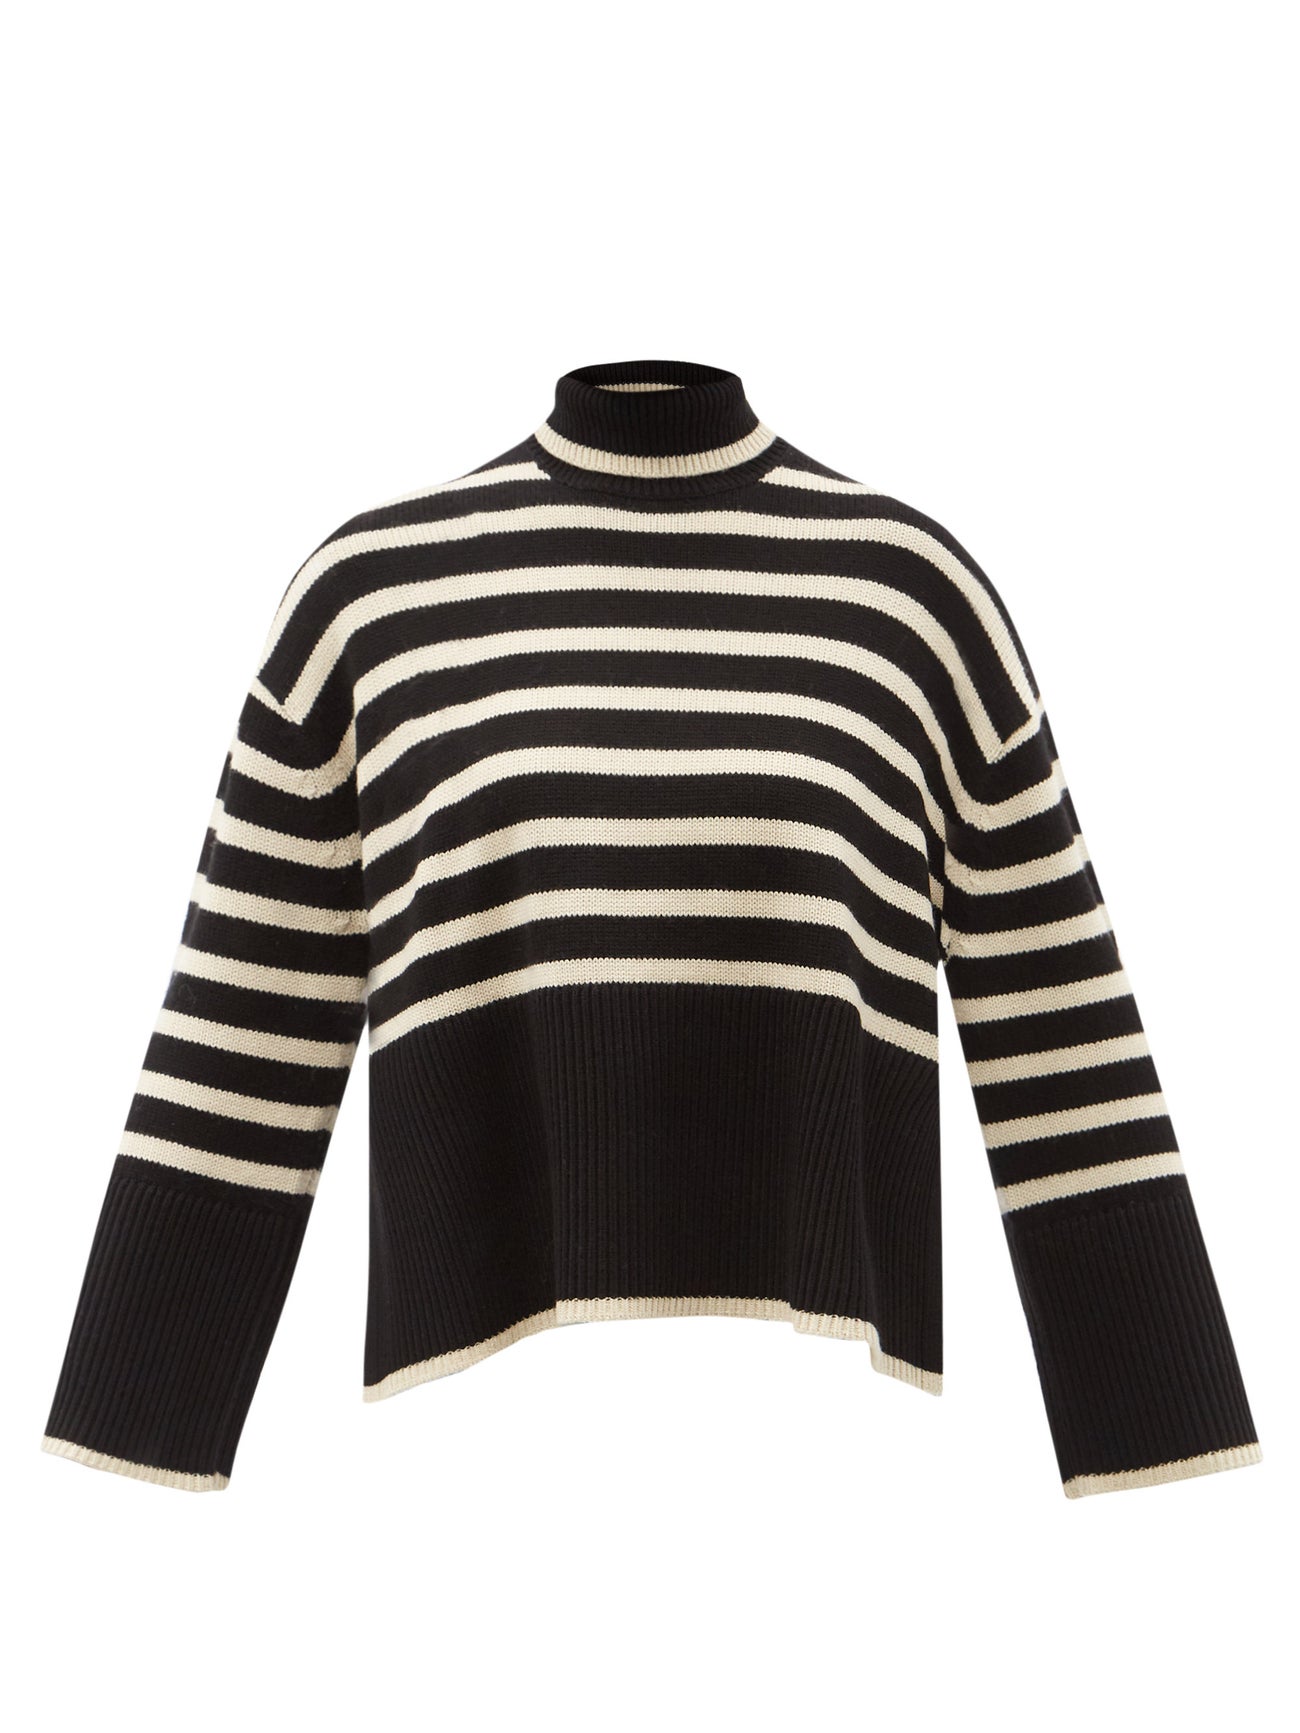 21 Designer Knitwear Pieces Fashion Girls Are Loving | Who What Wear UK